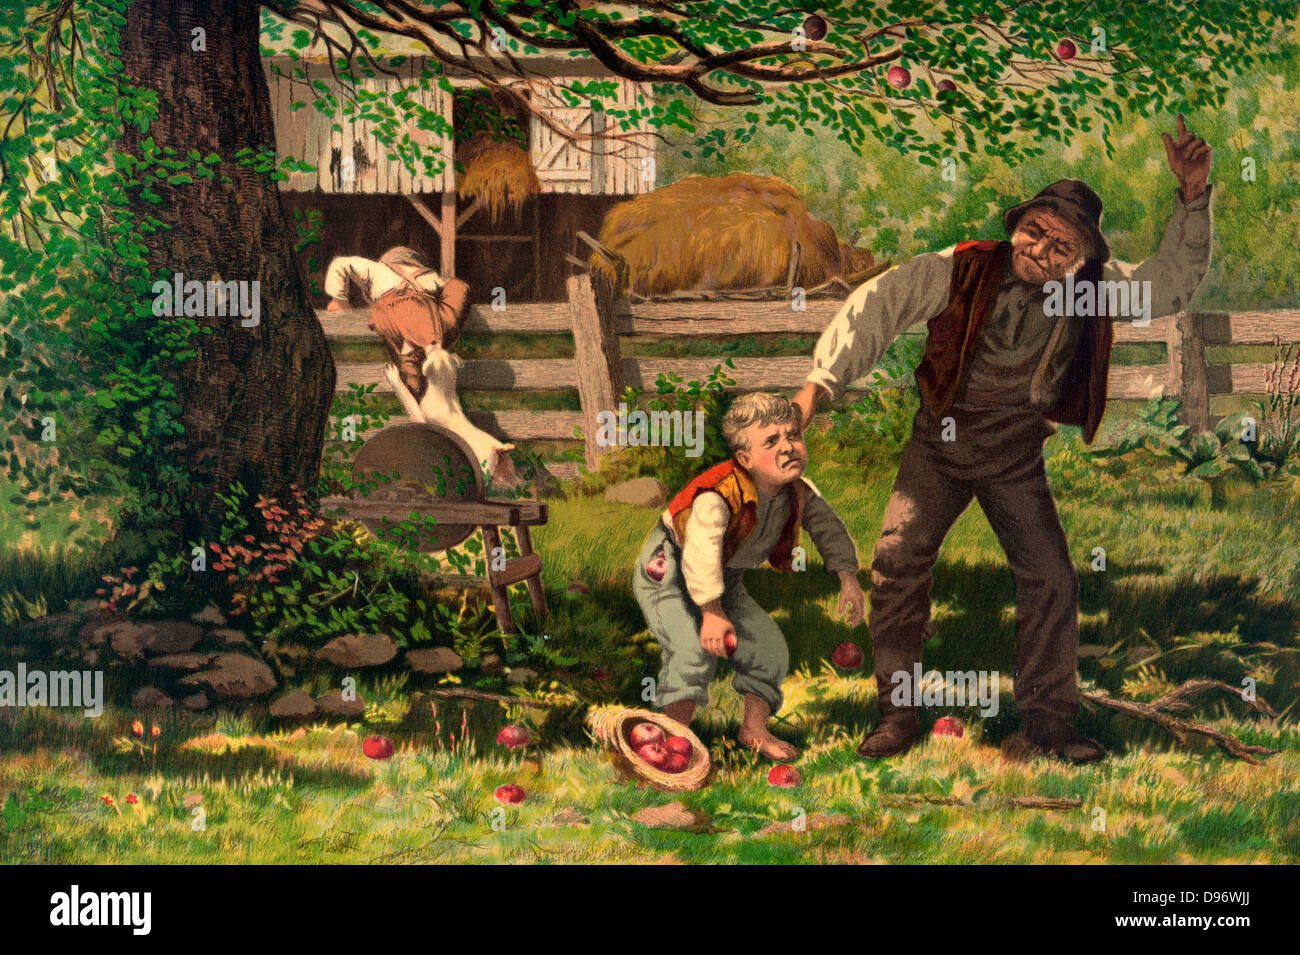 Stealing apples, an orchard owner grabs a young thiefs ears Stock Photo